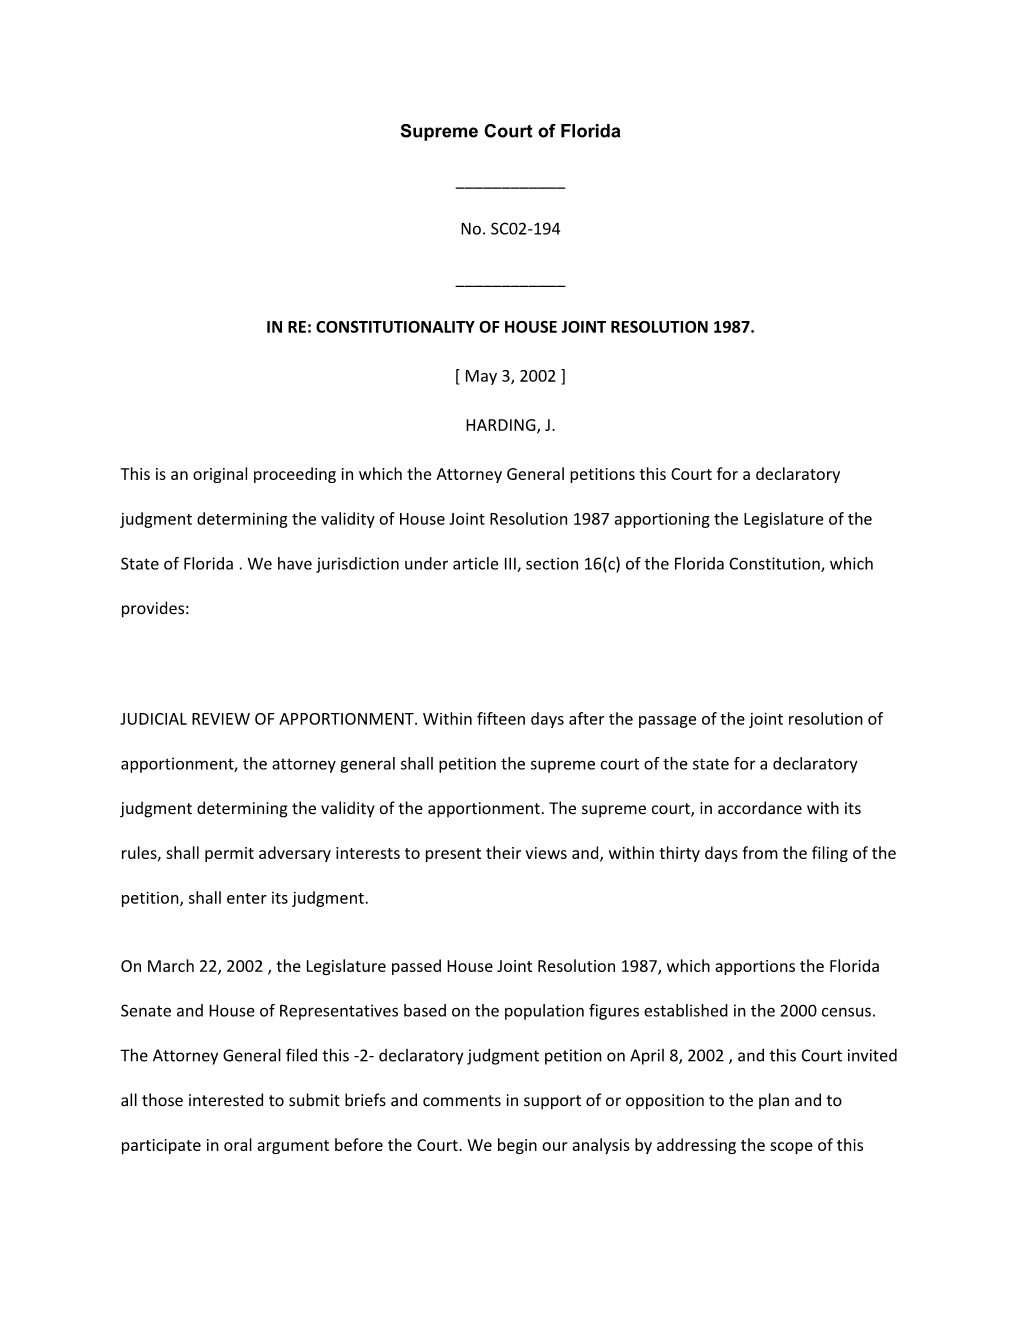 Constitutionality of House Joint Resolution 1987